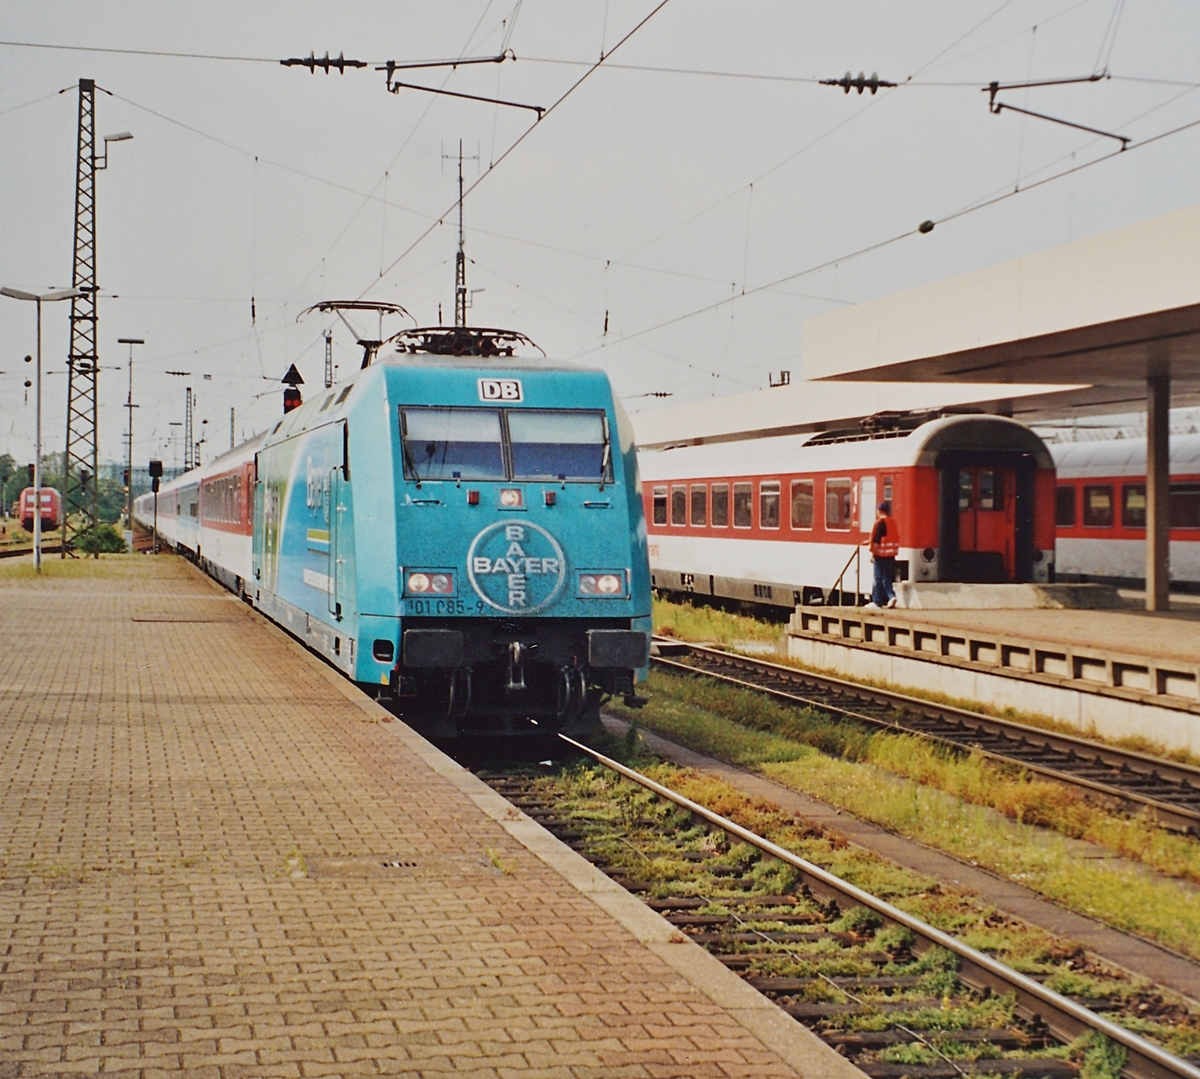 The DB 101 085-9 wiht his IC  Lötschberg  to Brig is arriving at Basel Bad Bf. 

analog picture from the mars 1995